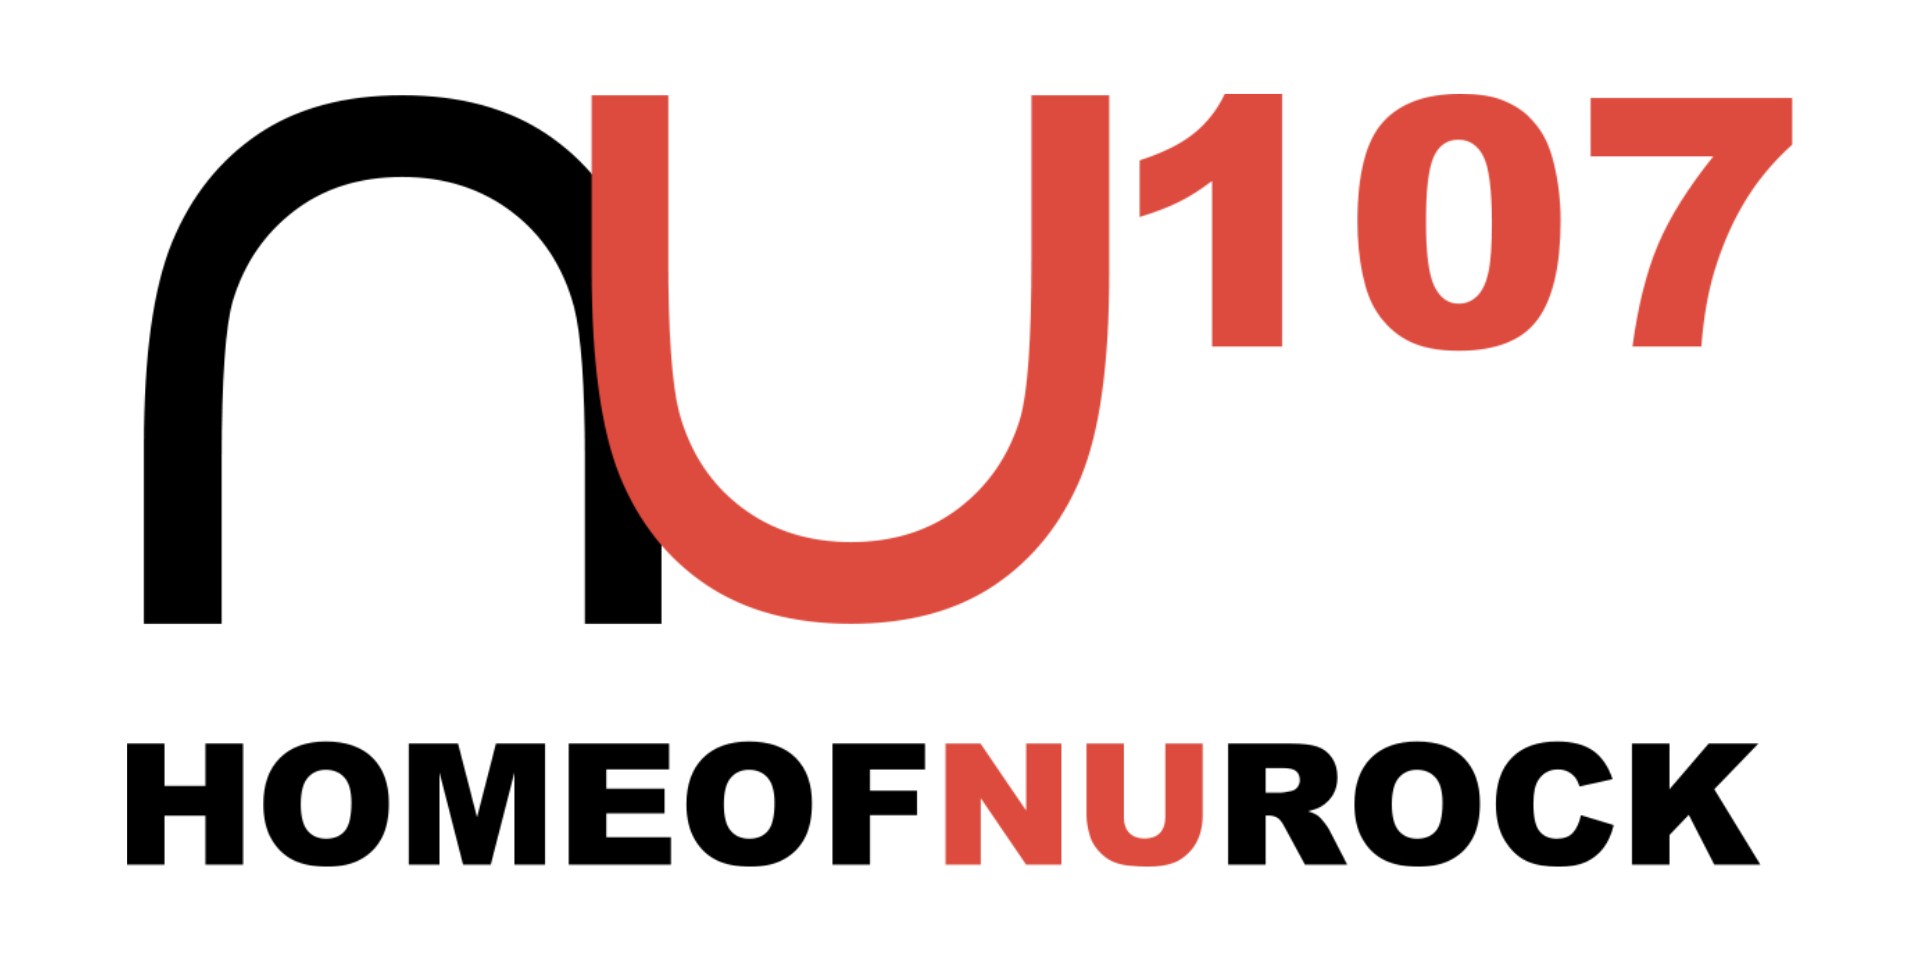 Say goodbye to 2020 with another NU107 reunion